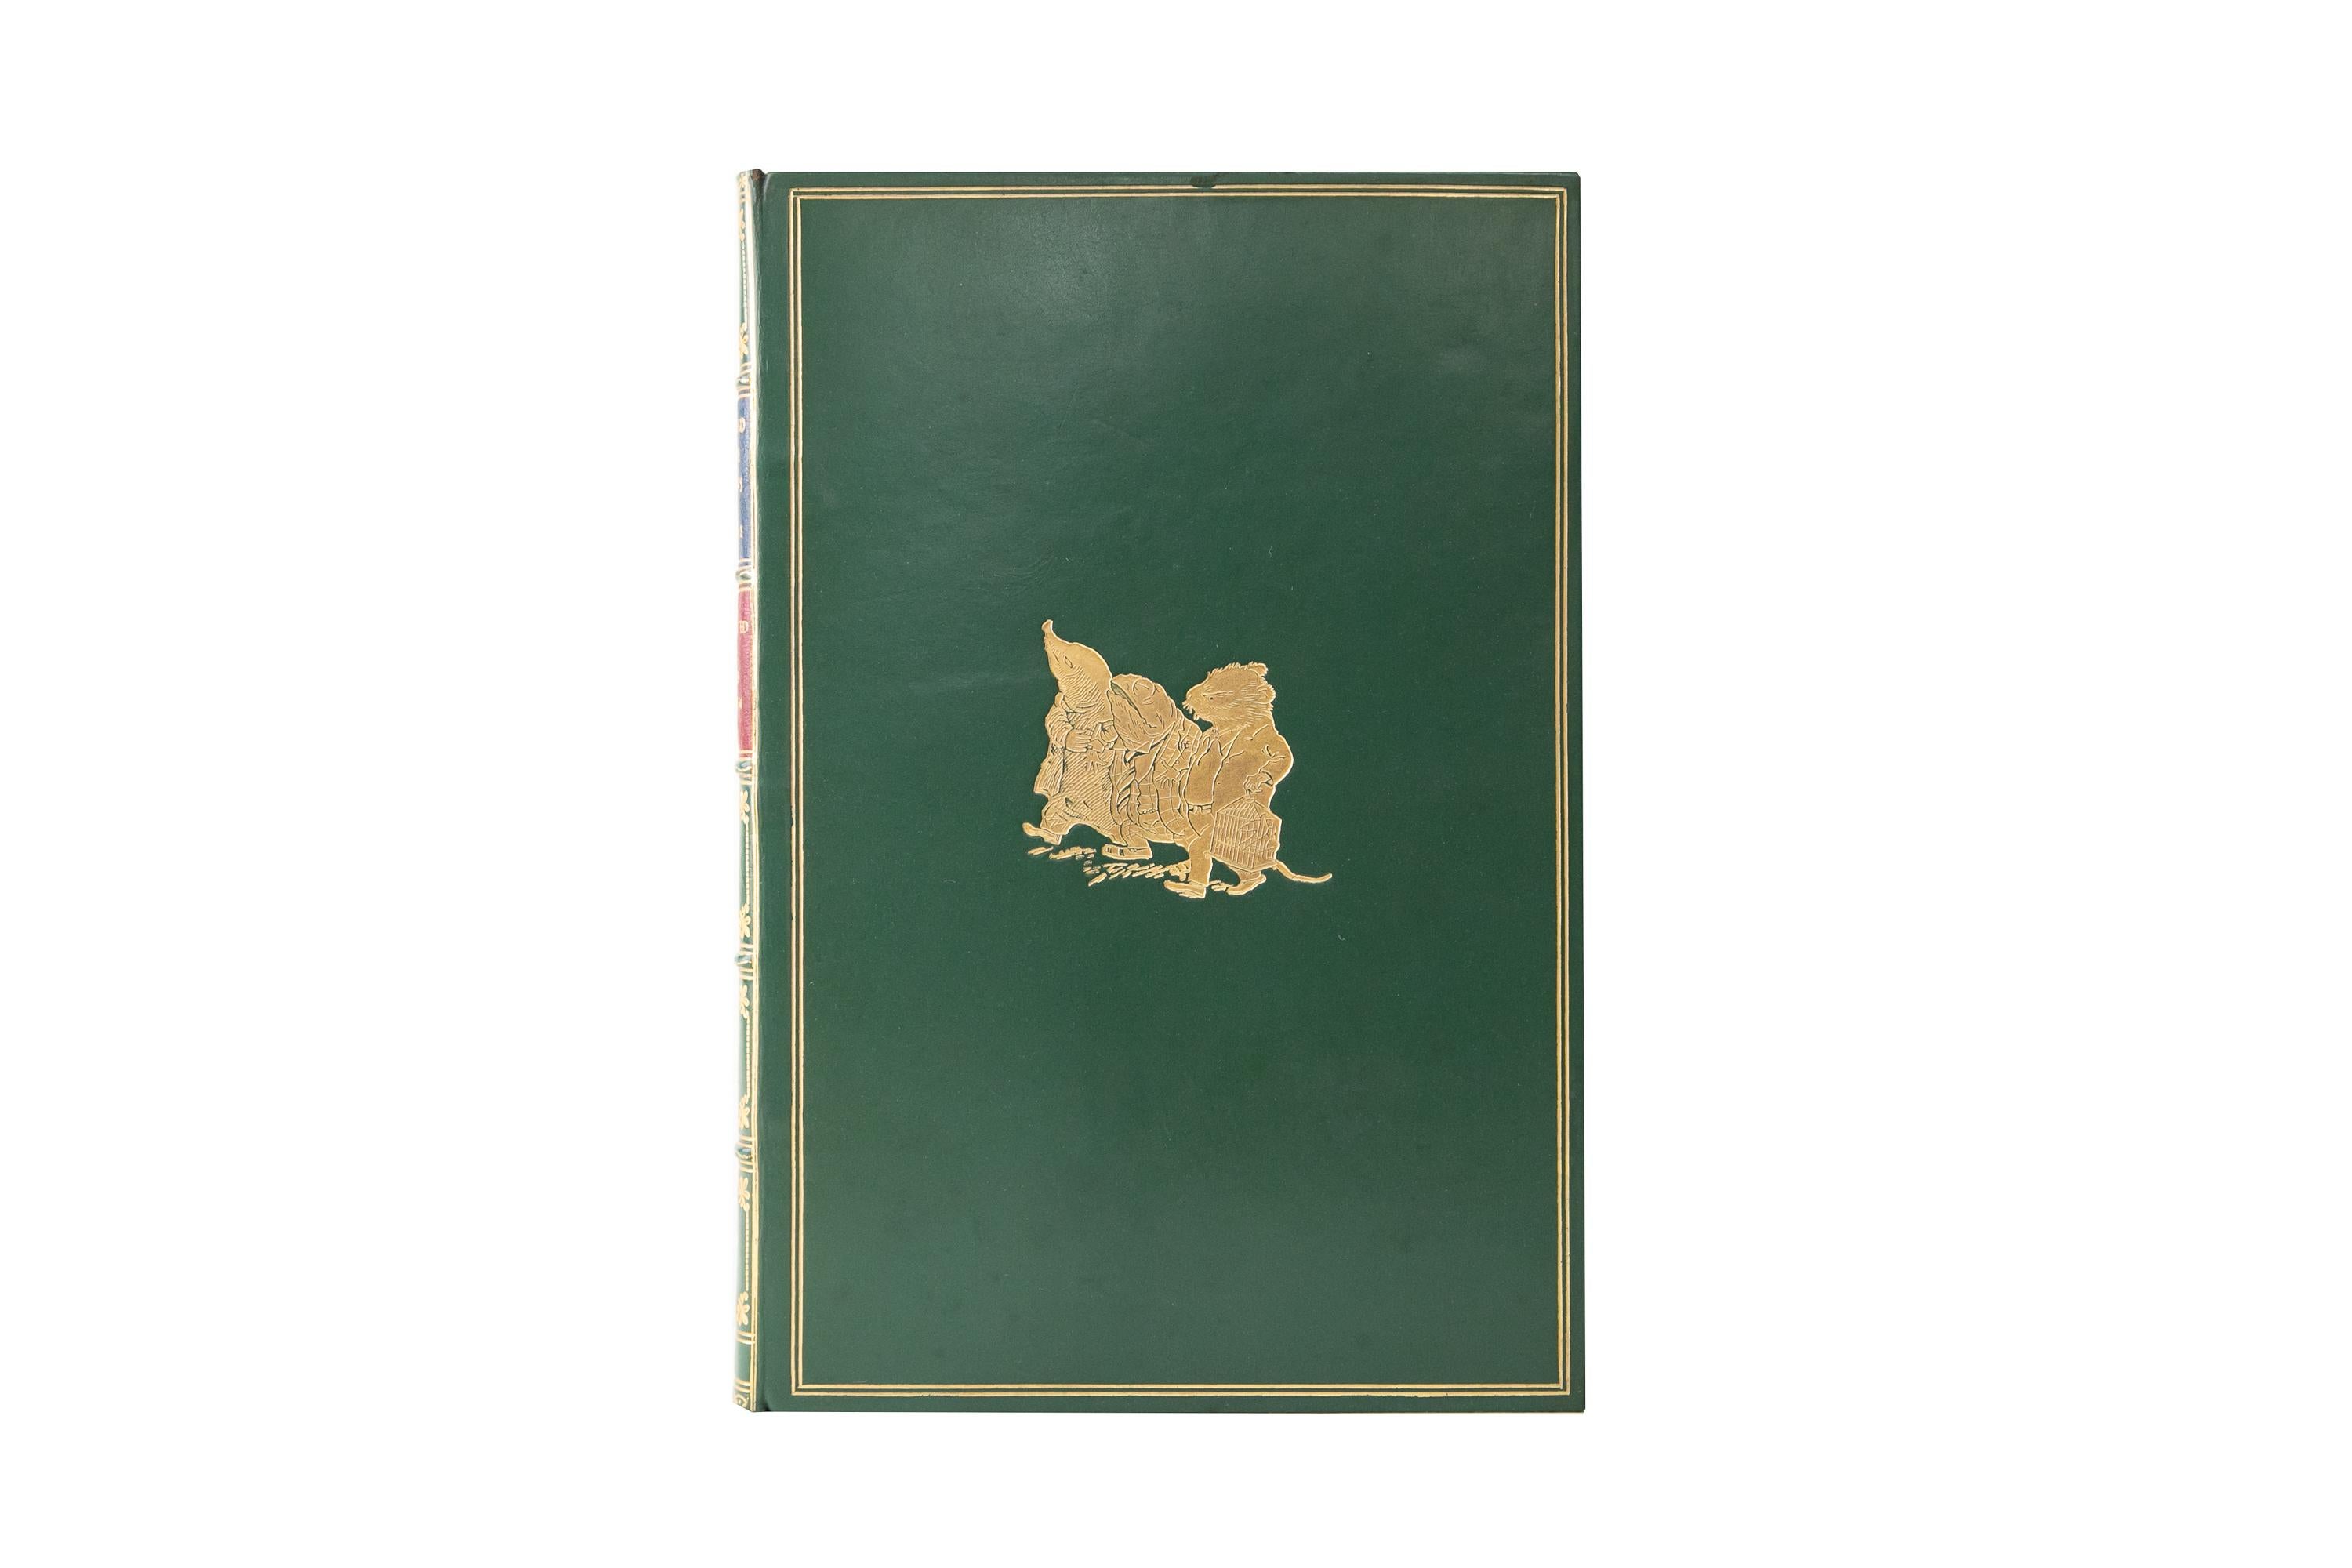 1 Volume. Kenneth Grahame, The Wind in the Willows. Bound by Charles E. Lauriat in full green calf with the cover displaying a double-ruled border and depictions of characters centrally, both gilt-tooled. The spine displays raised bands, bordering,